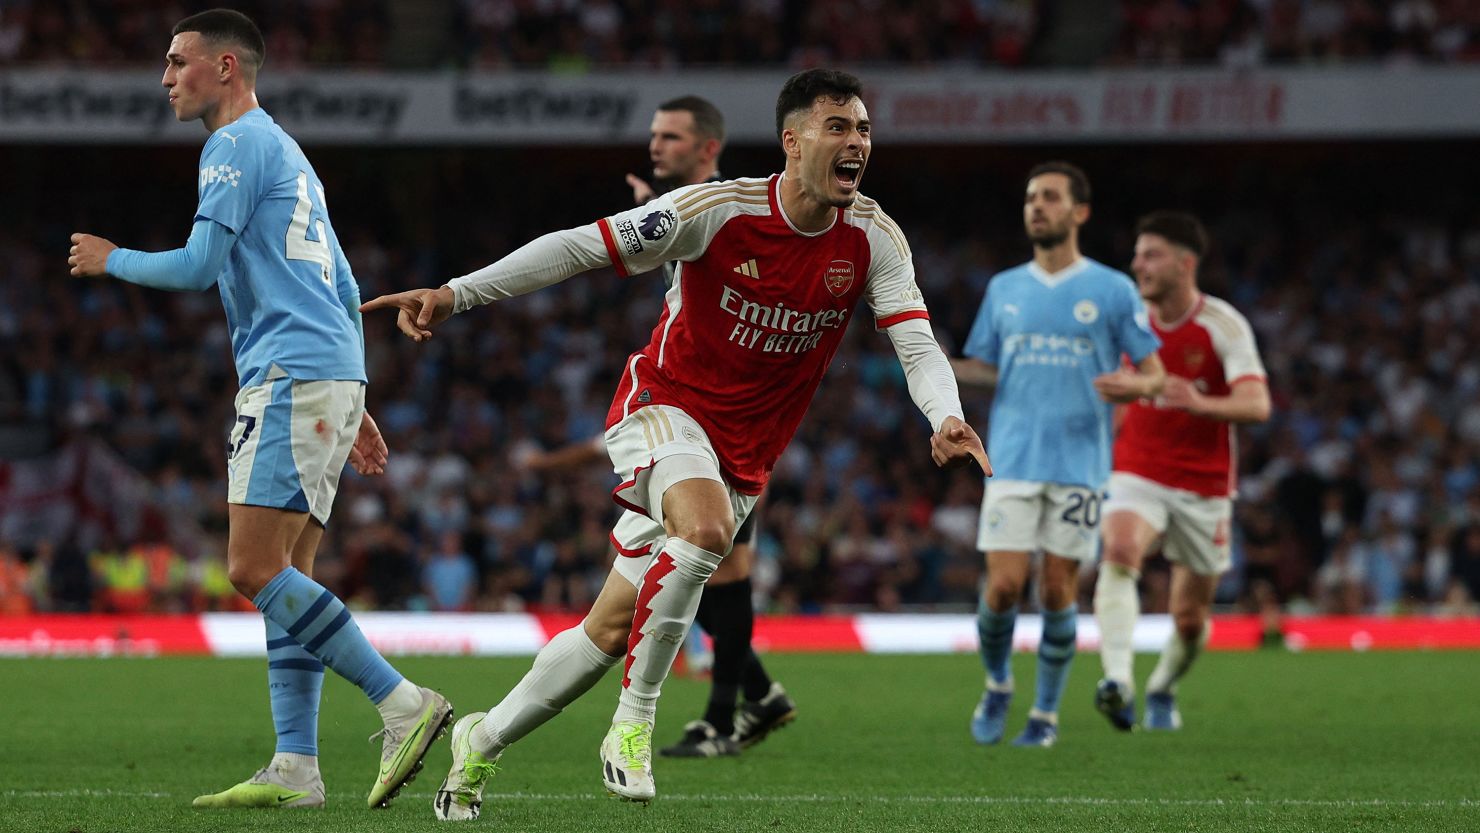 Gabriel Martinelli snatches statement win for Arsenal over Manchester City, Premier League